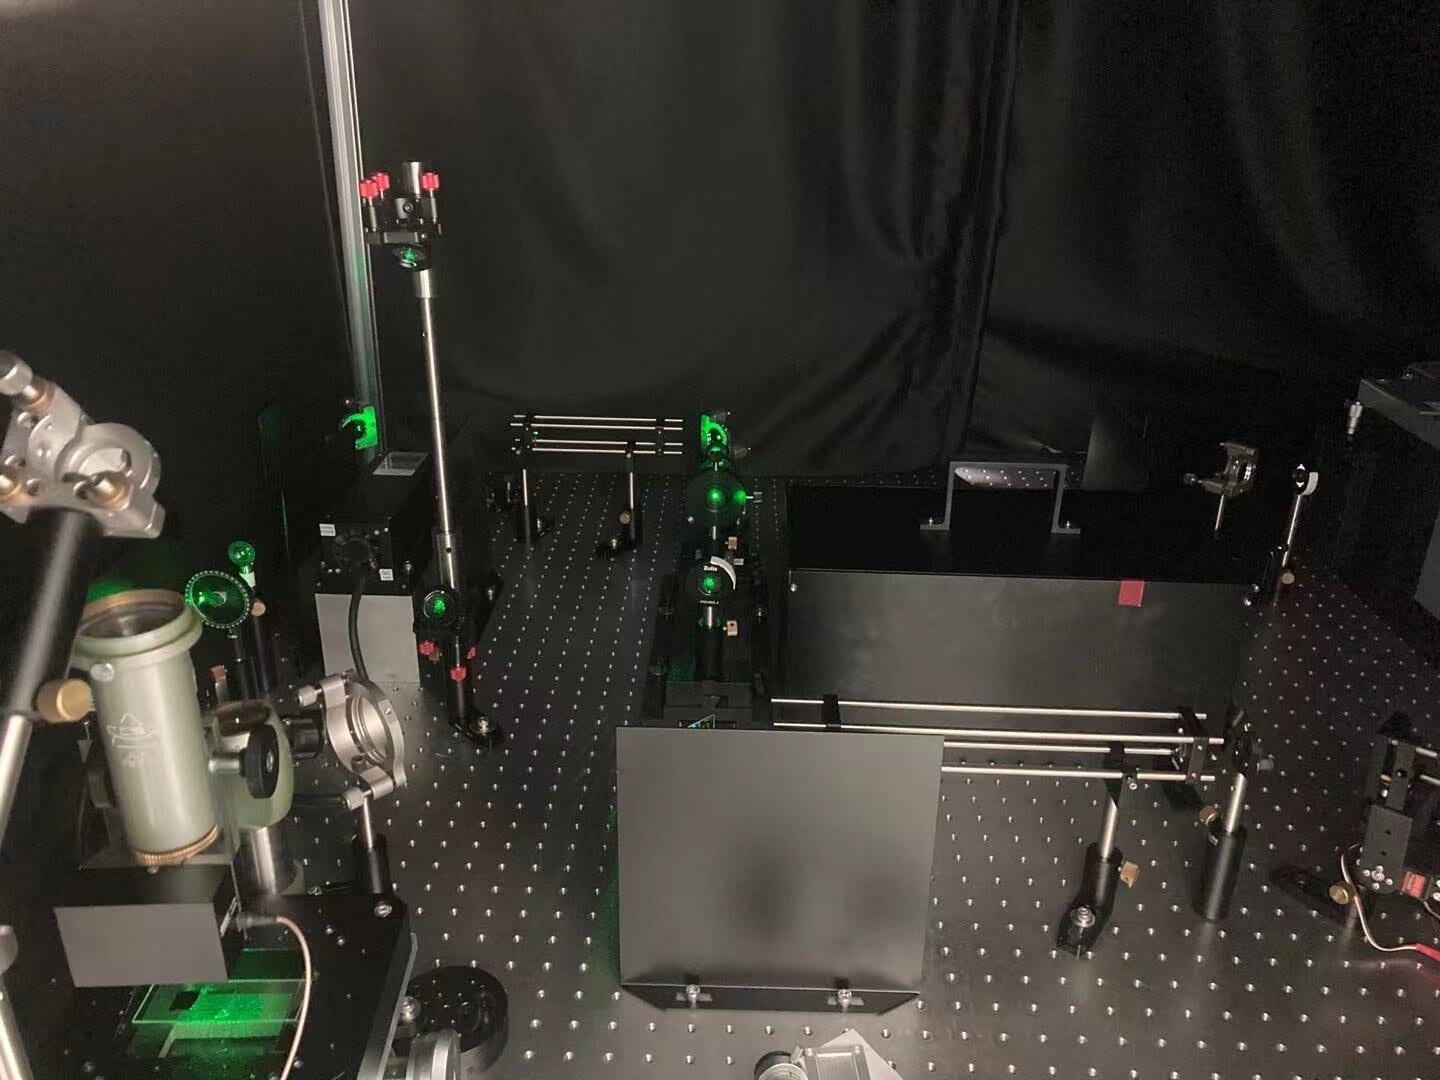 The new approach for digitizing color can be applied to cameras, displays and LED lighting. Because the color space studied isn’t device dependent, the same values should be perceived as the same color even if different devices are used. Pictured is a corner of the optical setup built by the researchers.

Credit: Min Qiu’s PAINT research group, Westlake University